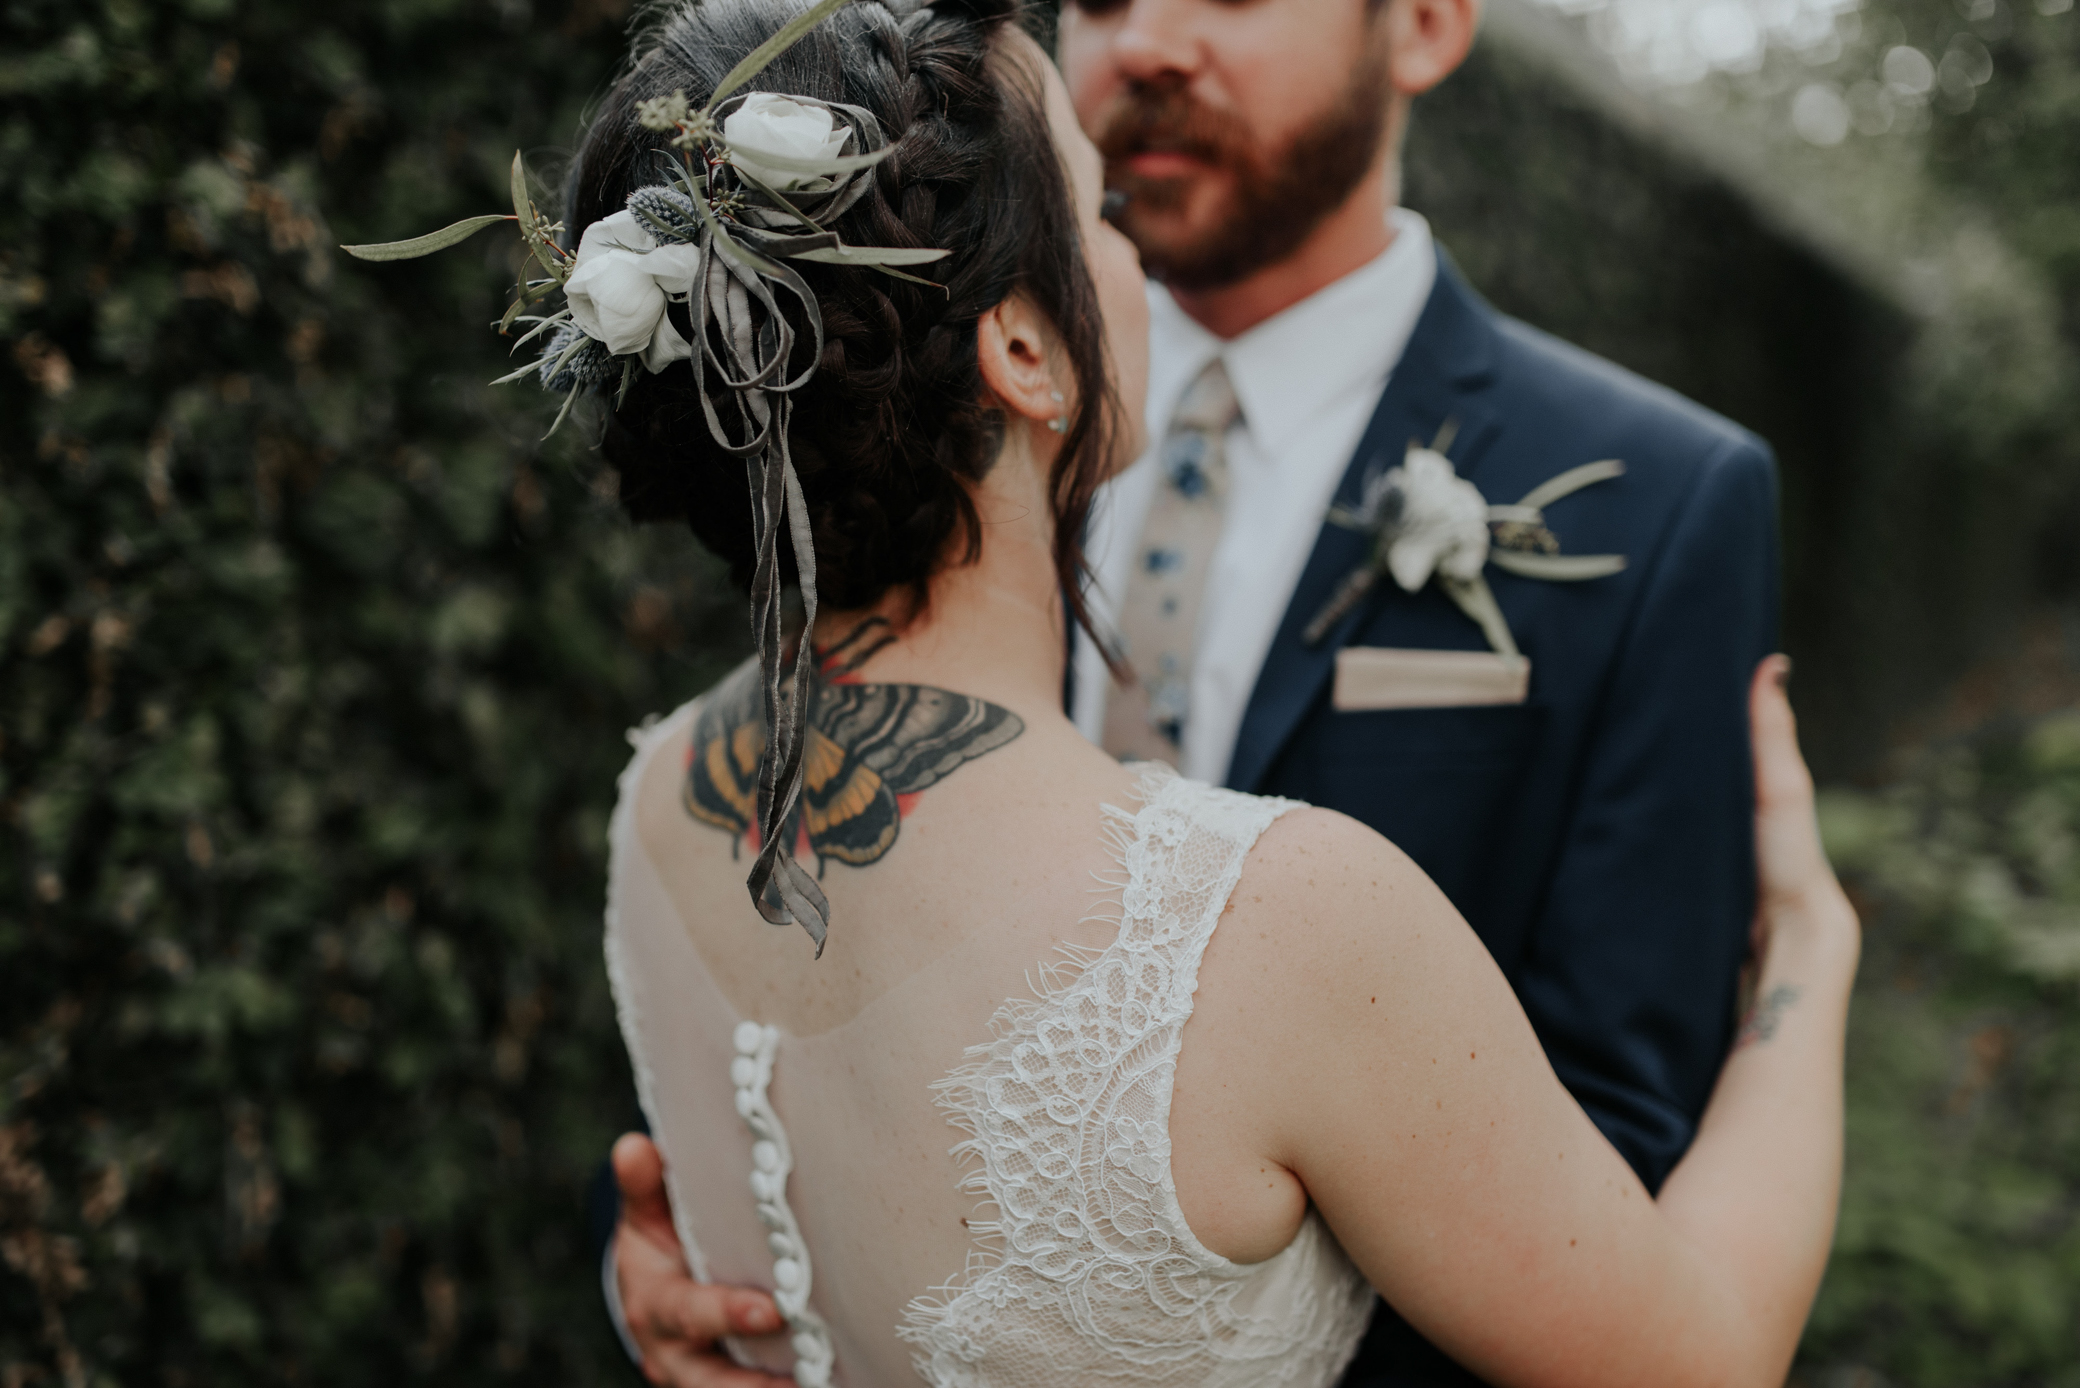 Eclectic Bohemian Wedding in Jackson, MS at The Cedars